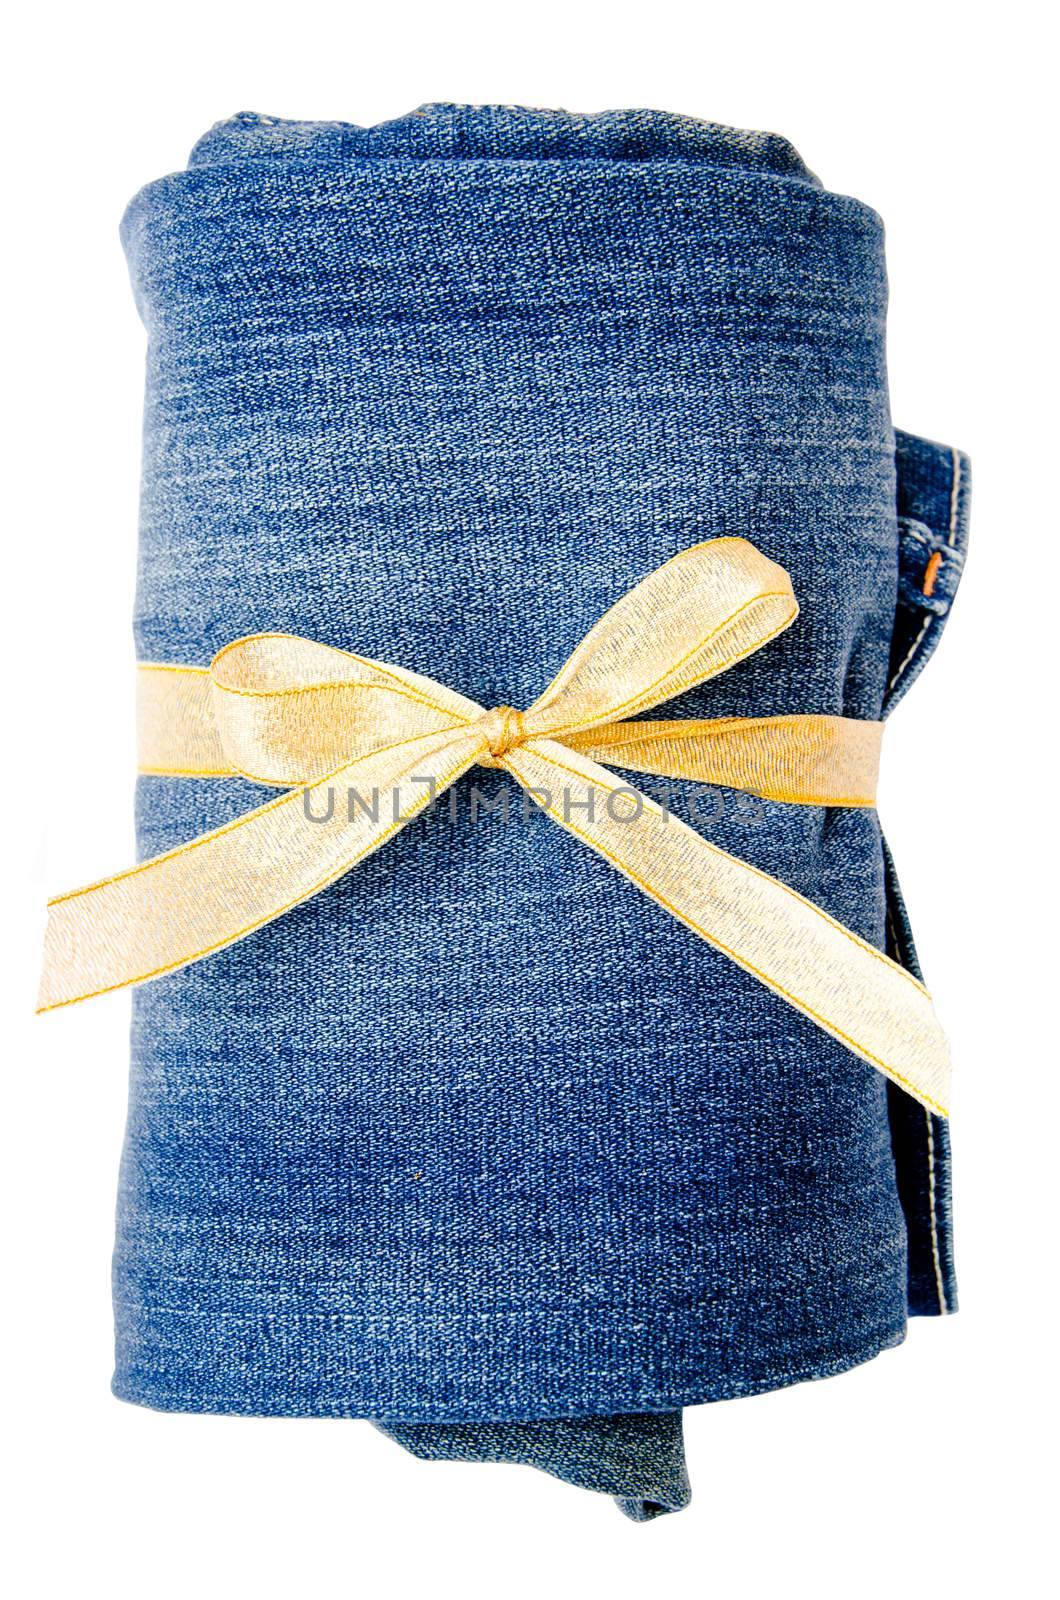 blue jeans and gold ribbon isolated on white background. Gift concept.